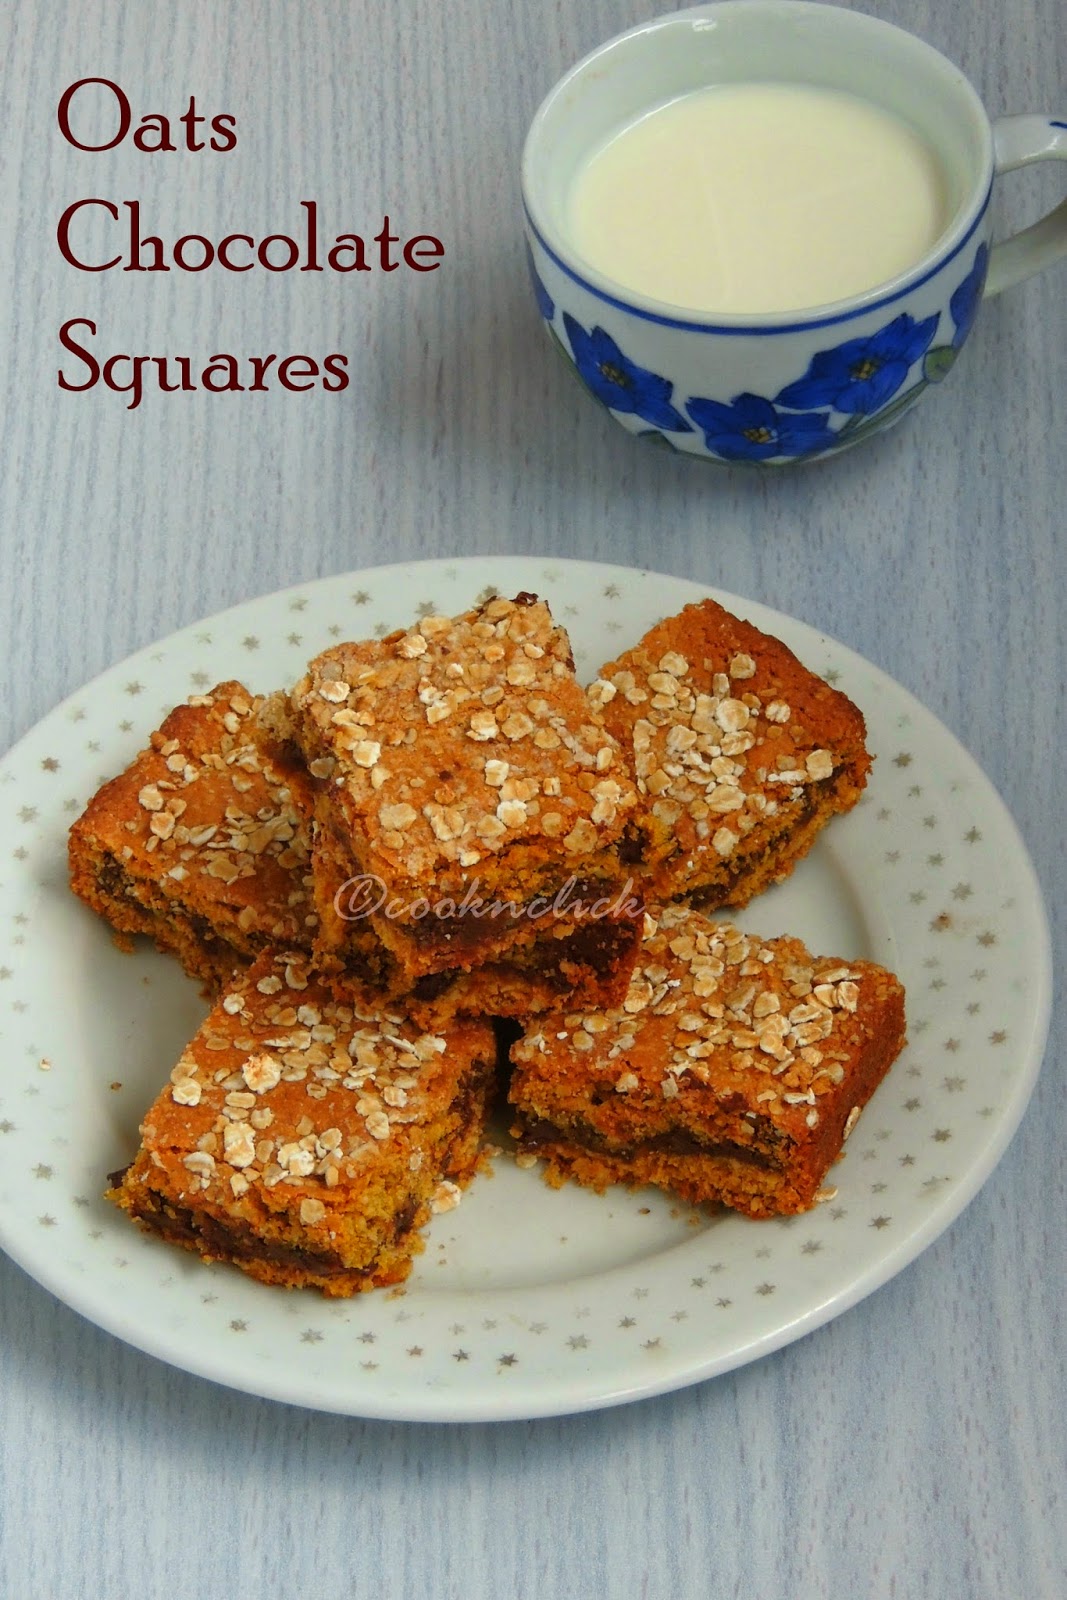 Oats chocolate squares, eggless chocolate squares, chocolate squares